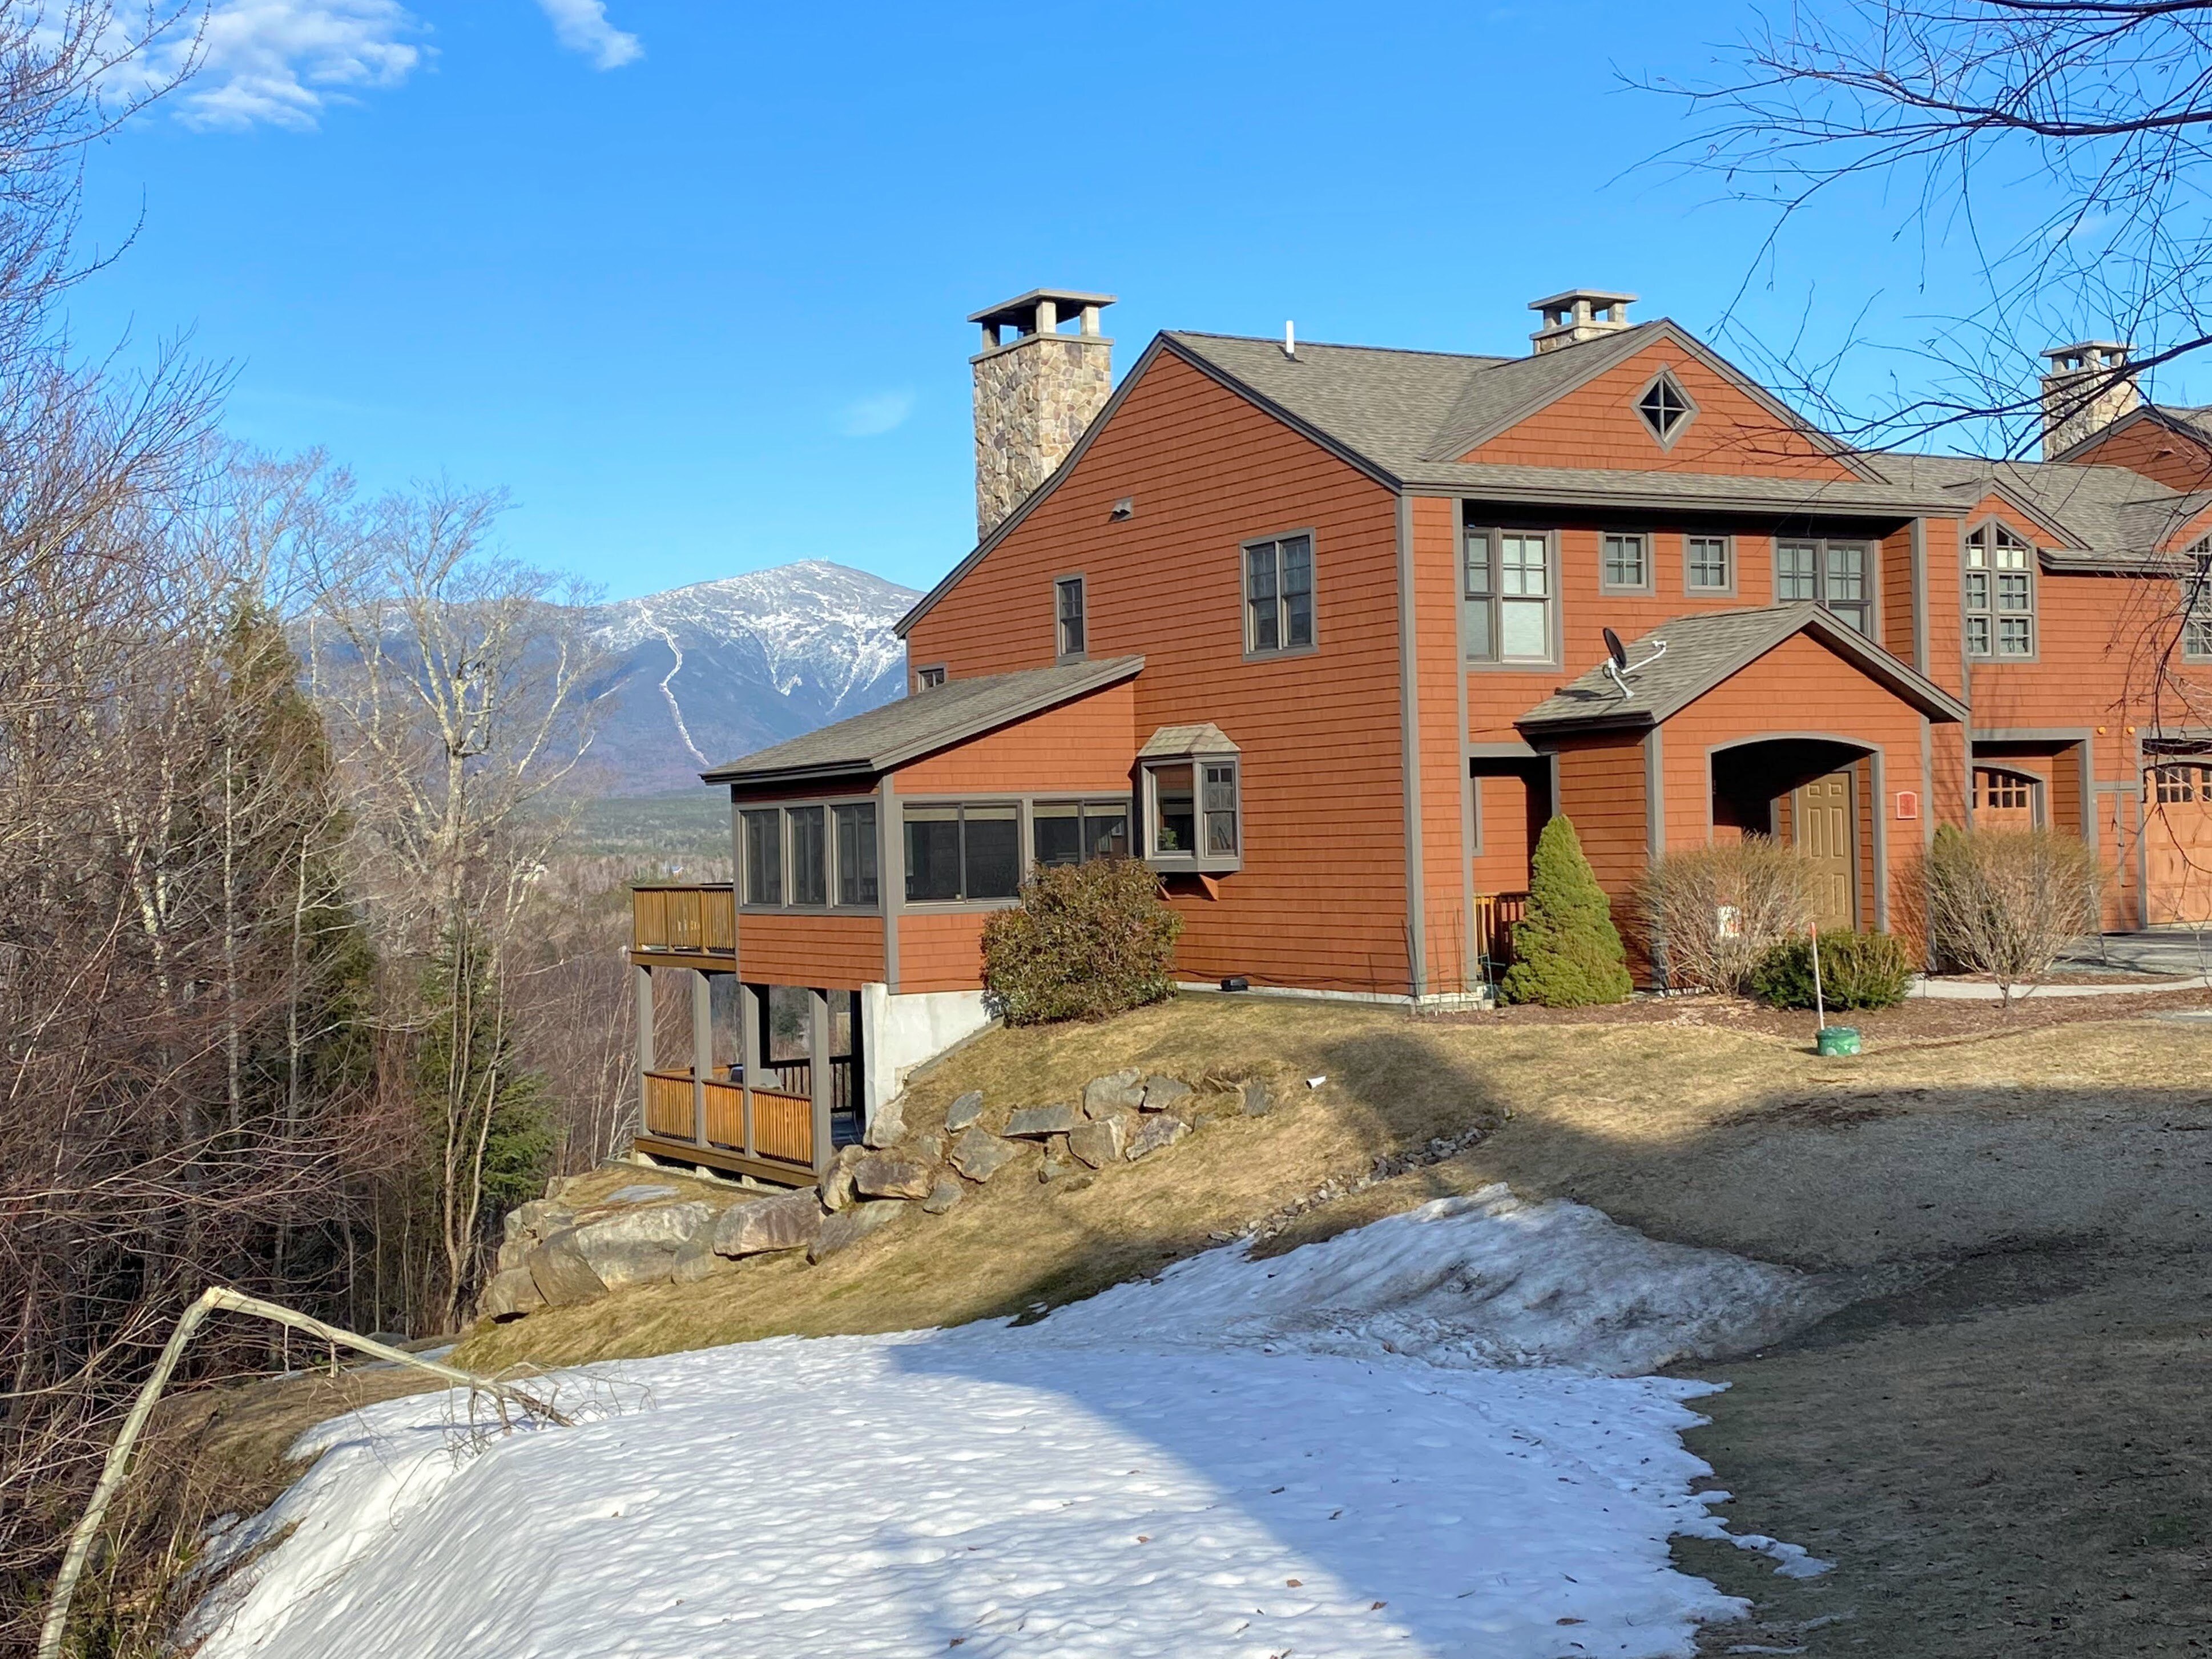 Property Image 1 - P4 NEW Ski-in Ski-out Presidential View luxury home w/ garage, ping pong!